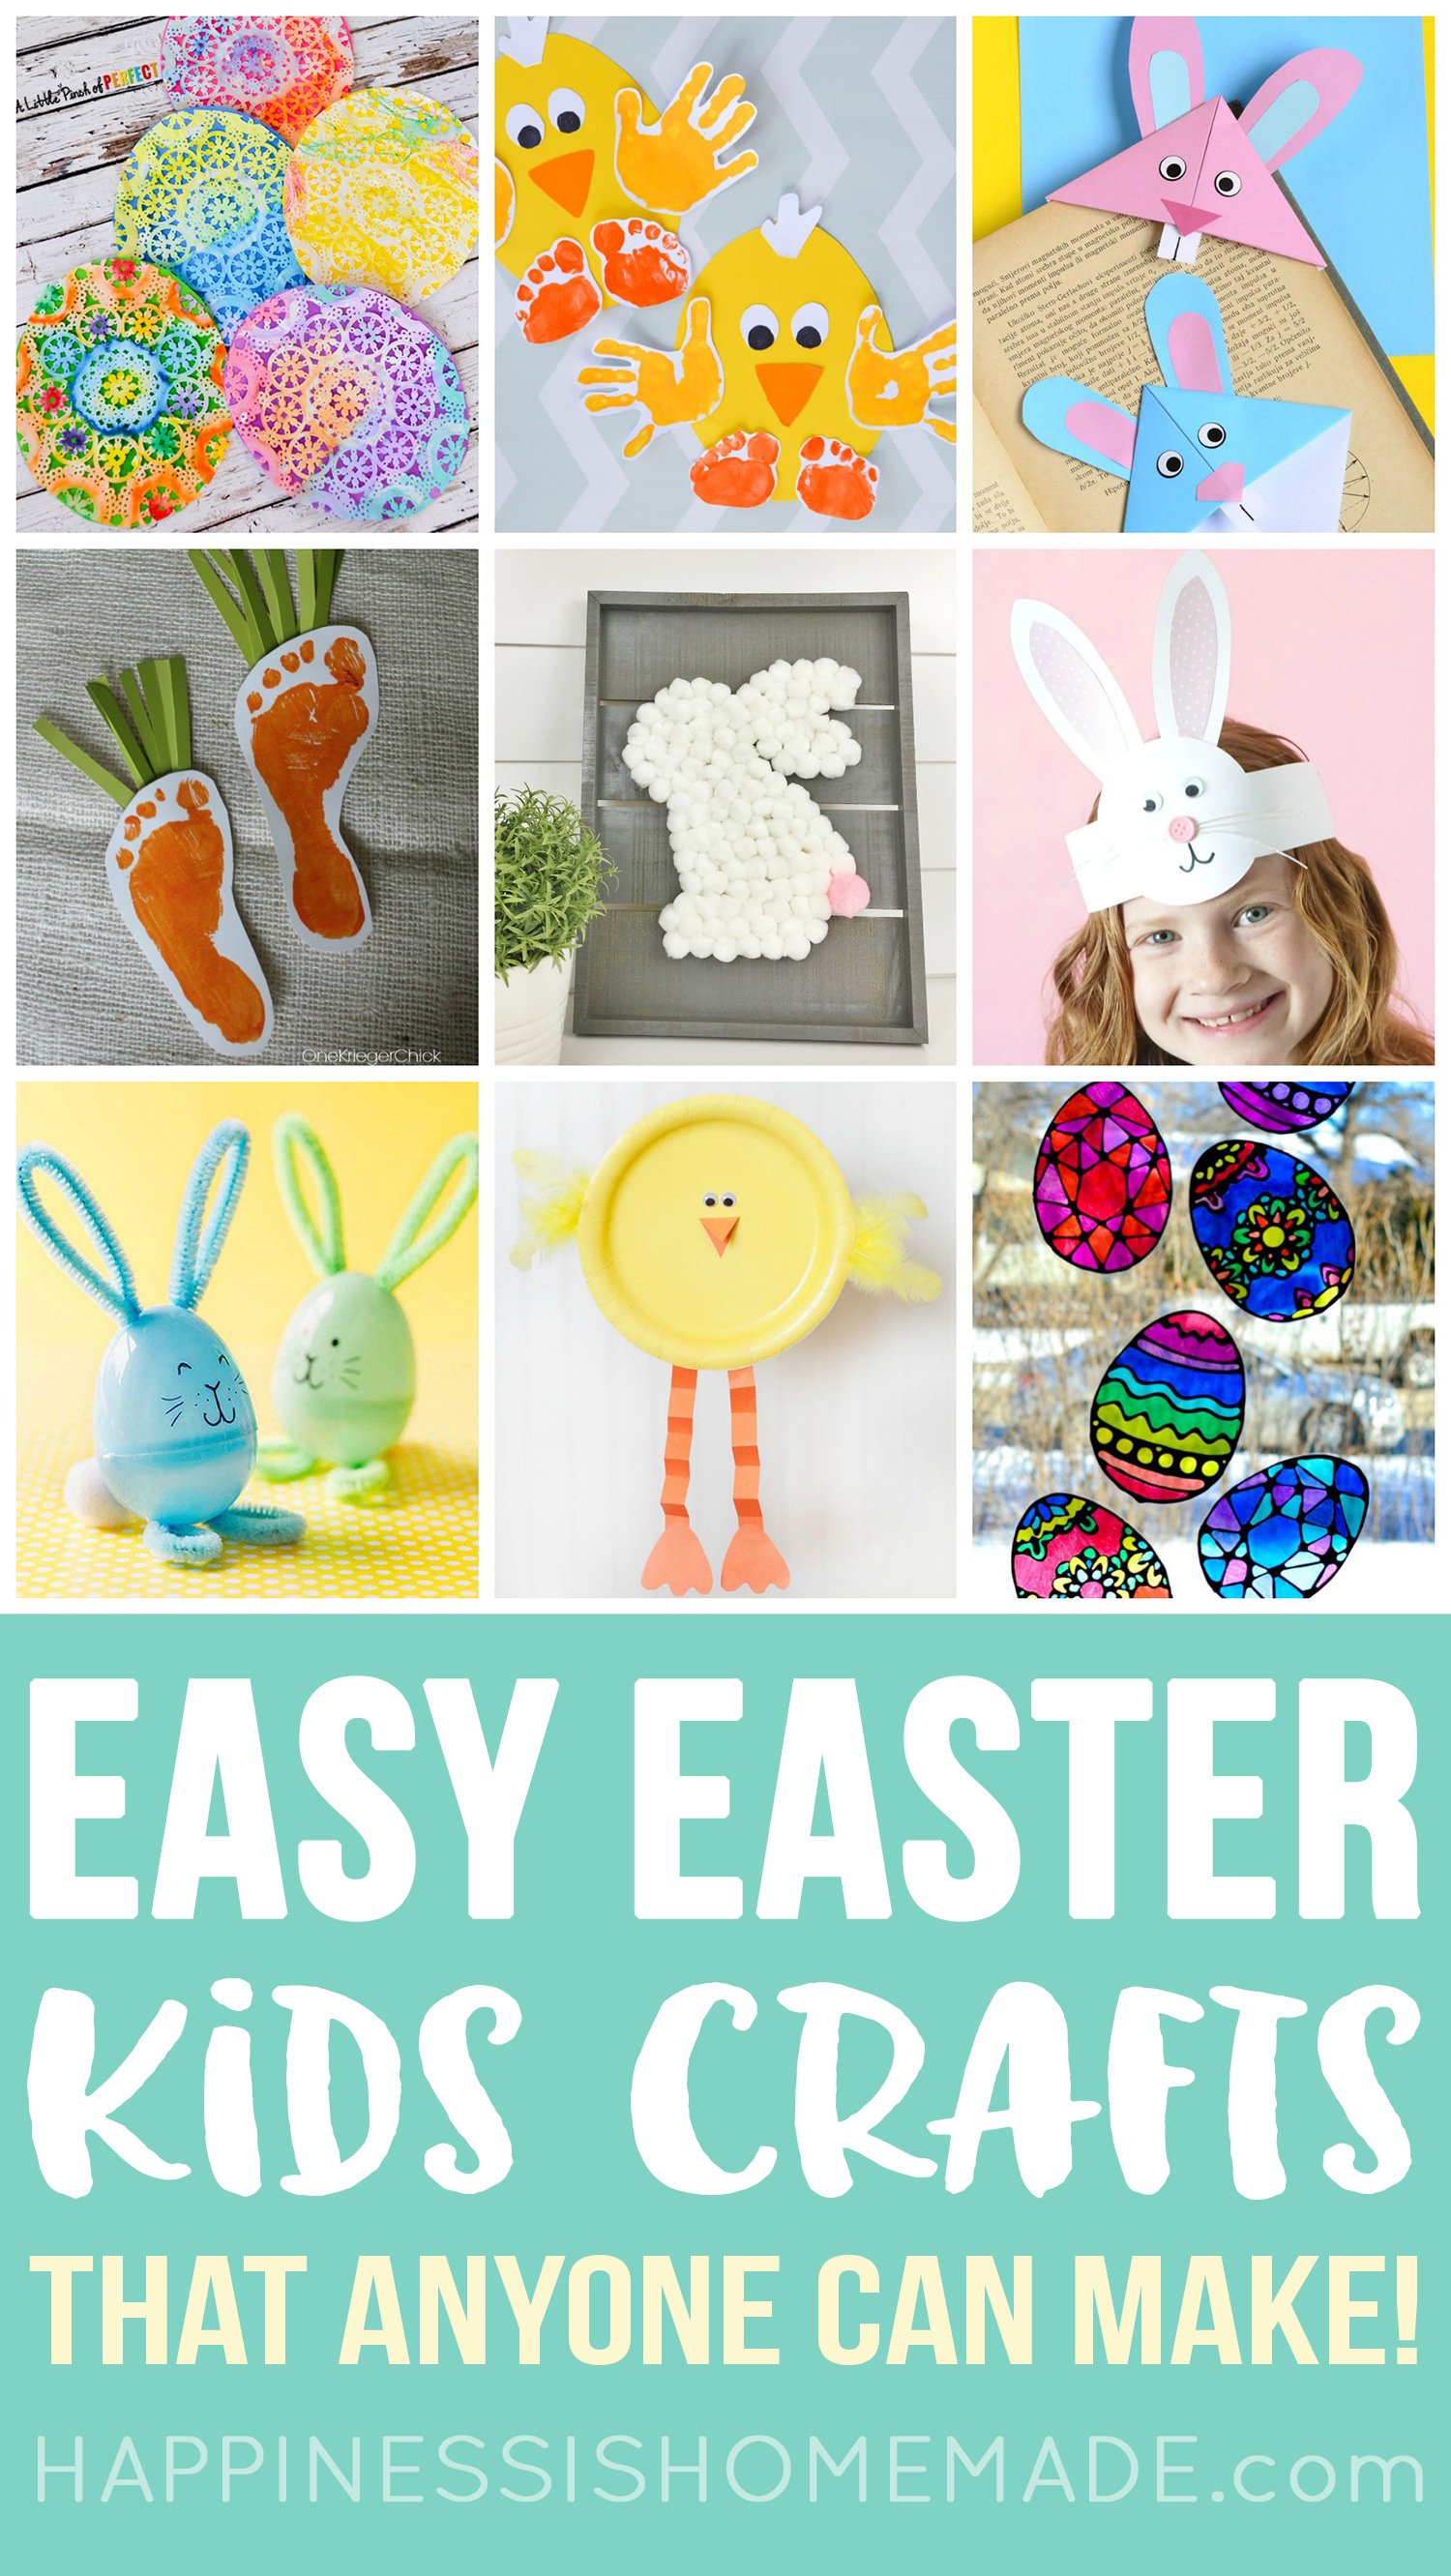 50 Quick Easy Kids Crafts That Anyone Can Make Happiness Is Homemade,Tiny Half Bathroom Ideas